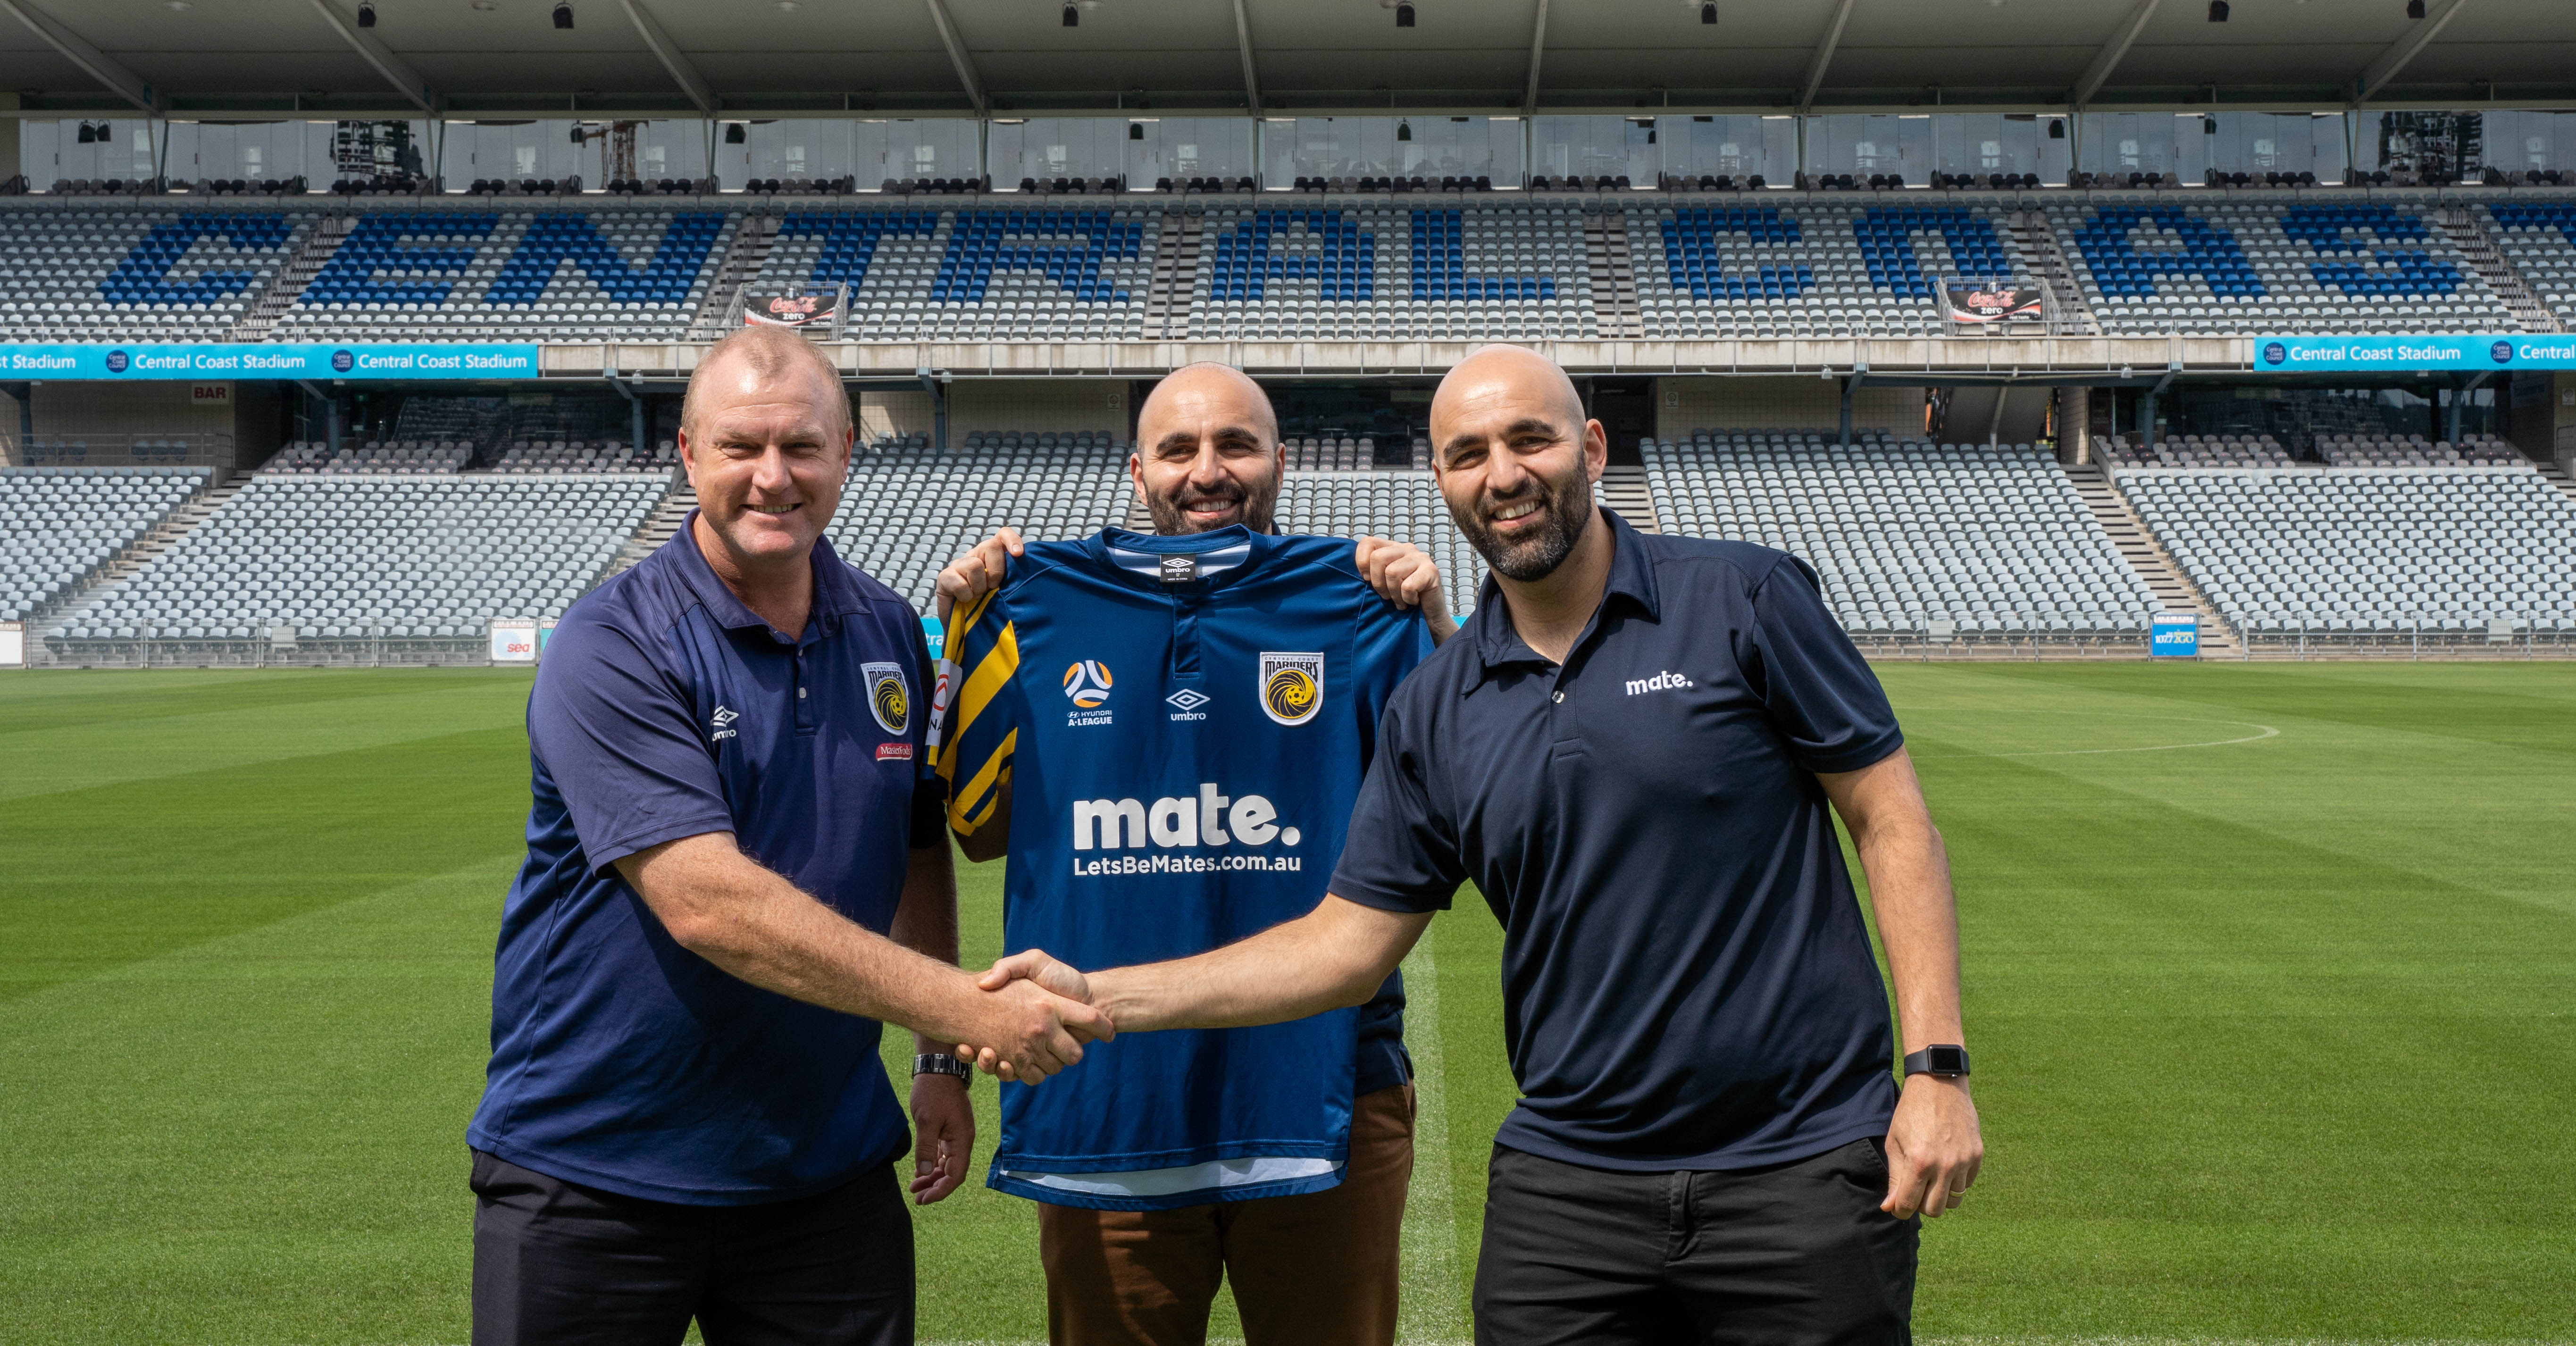 Central Coast Mariners & MATE exciting partnership - Central Coast